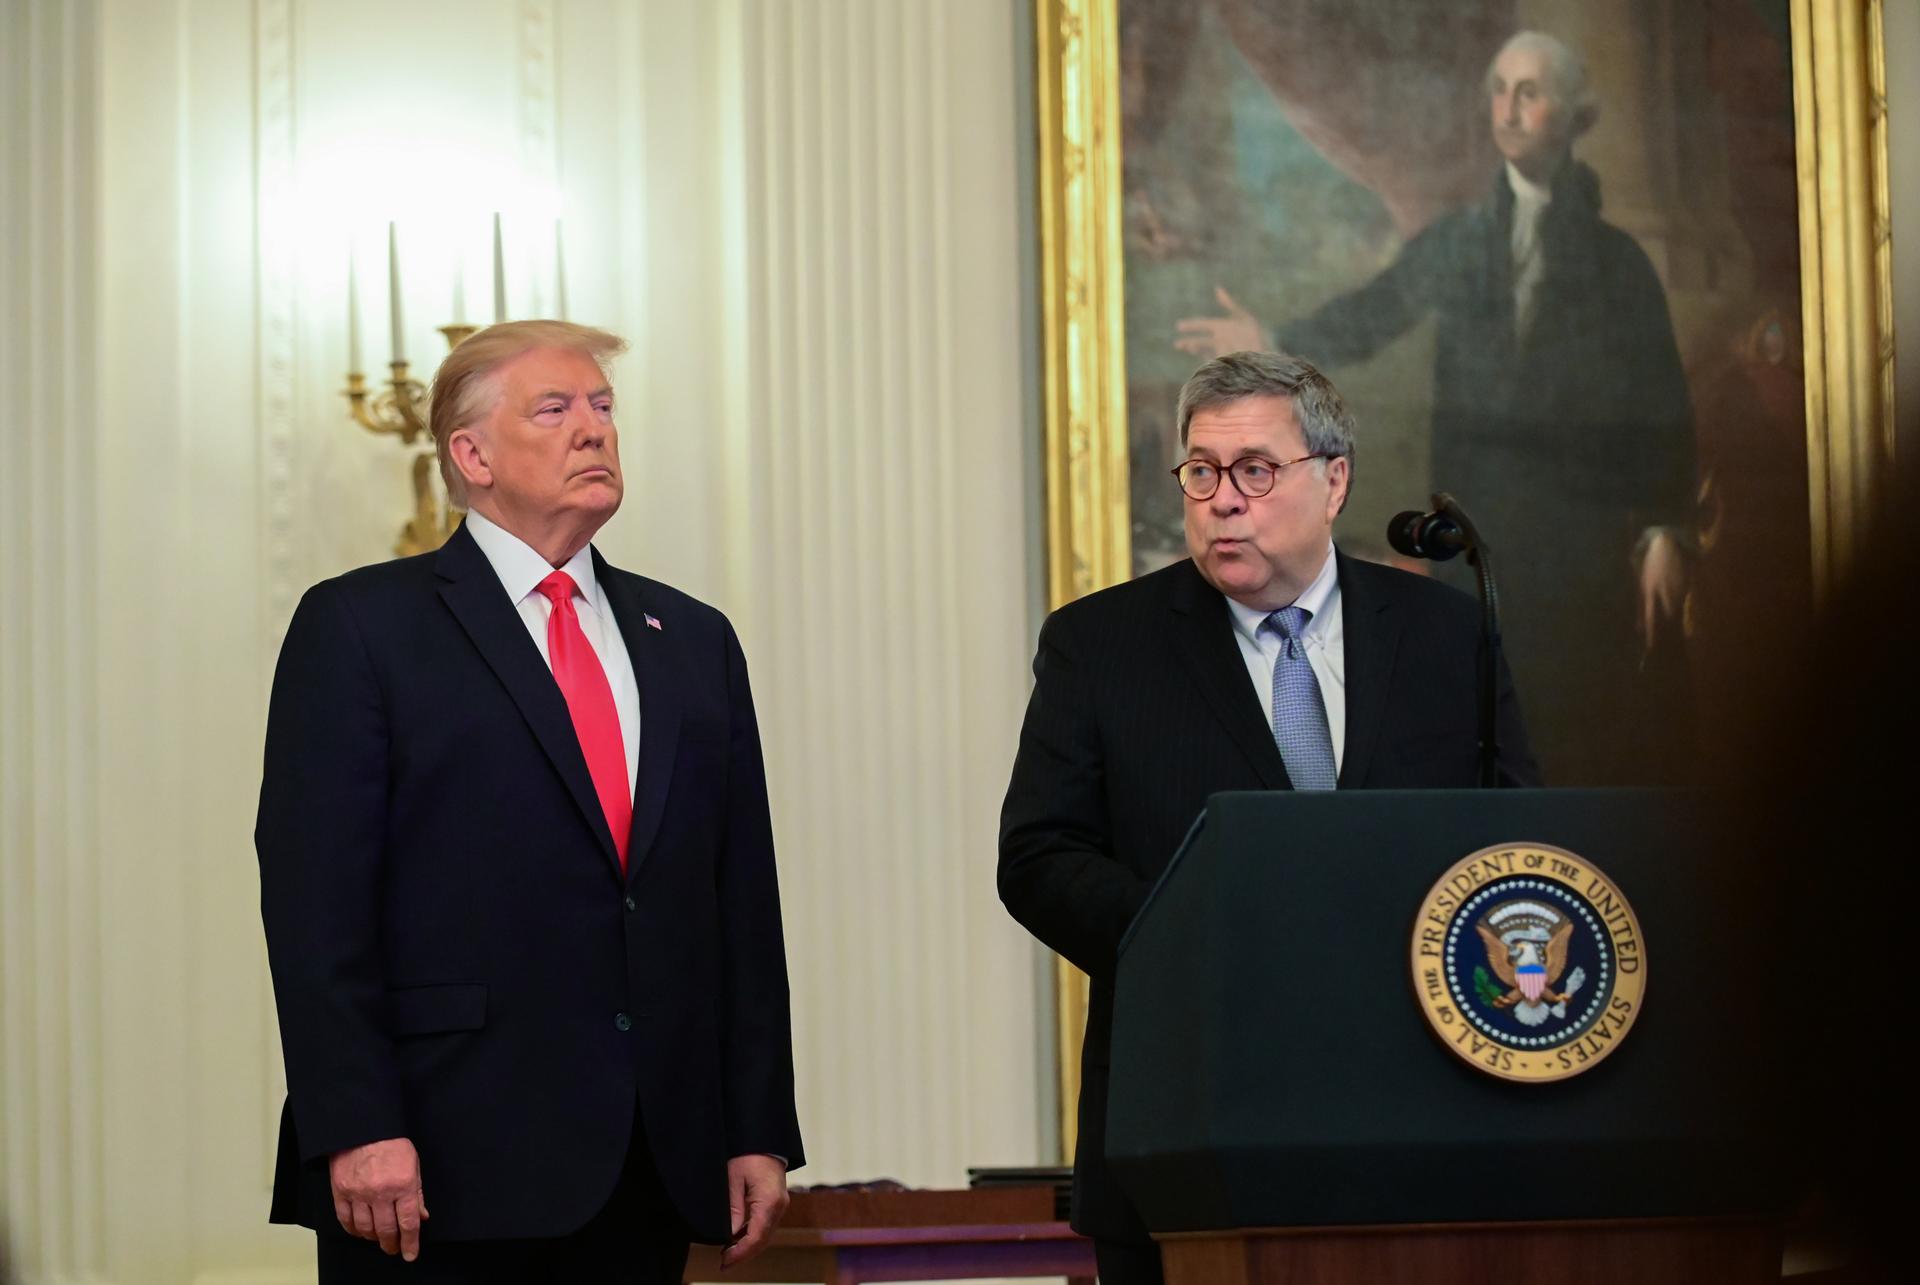 Attorney General William Barr speaks at a lectern while standing beside President Donald Trump.